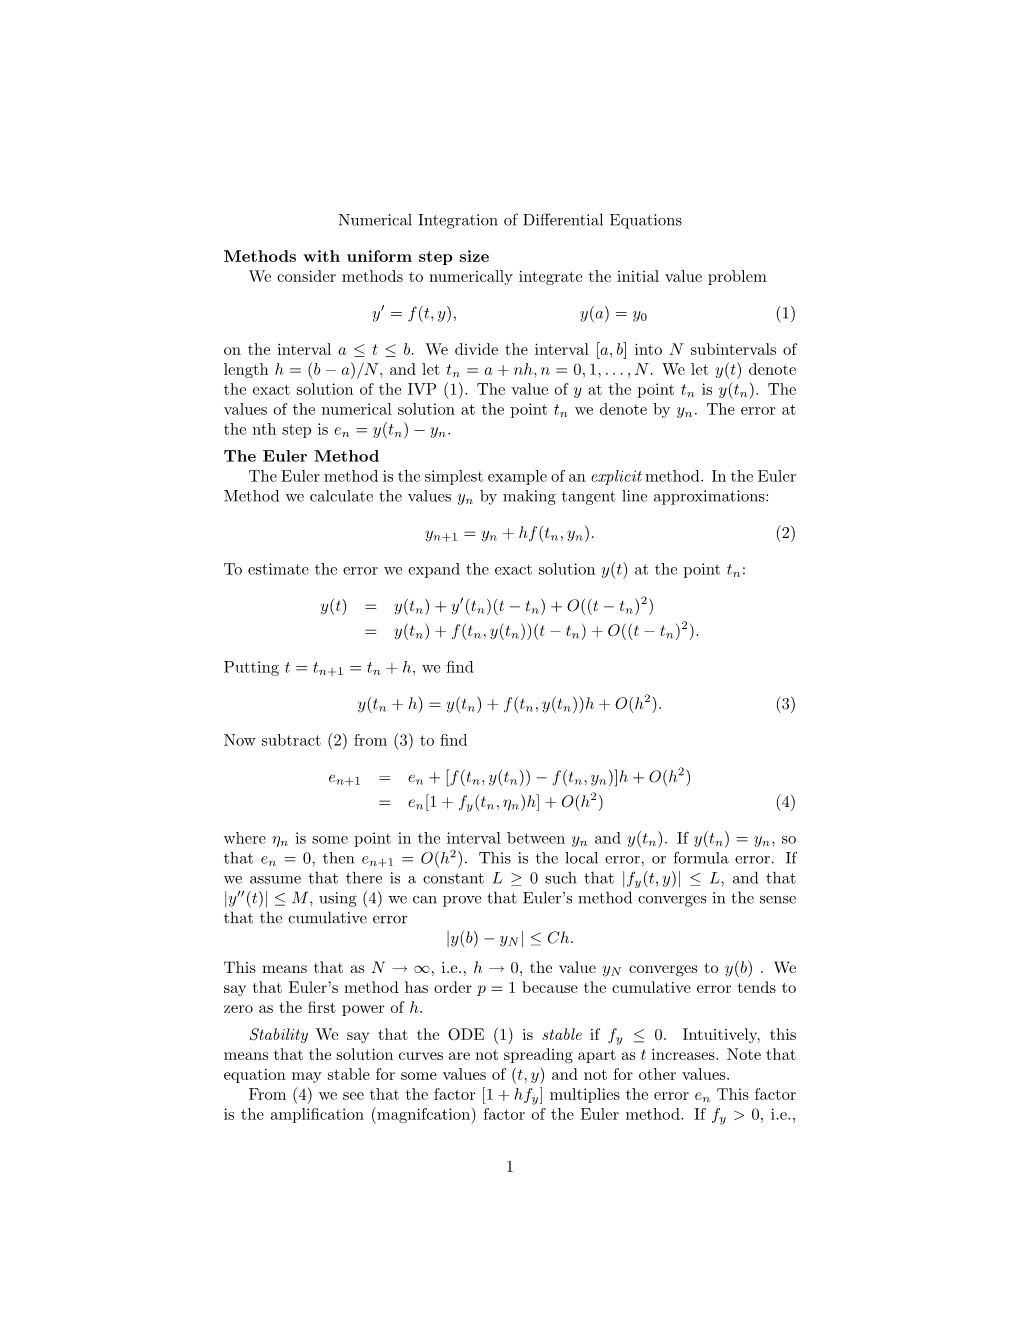 Numerical Integration of Differential Equations Methods with Uniform Step Size We Consider Methods to Numerically Integrate